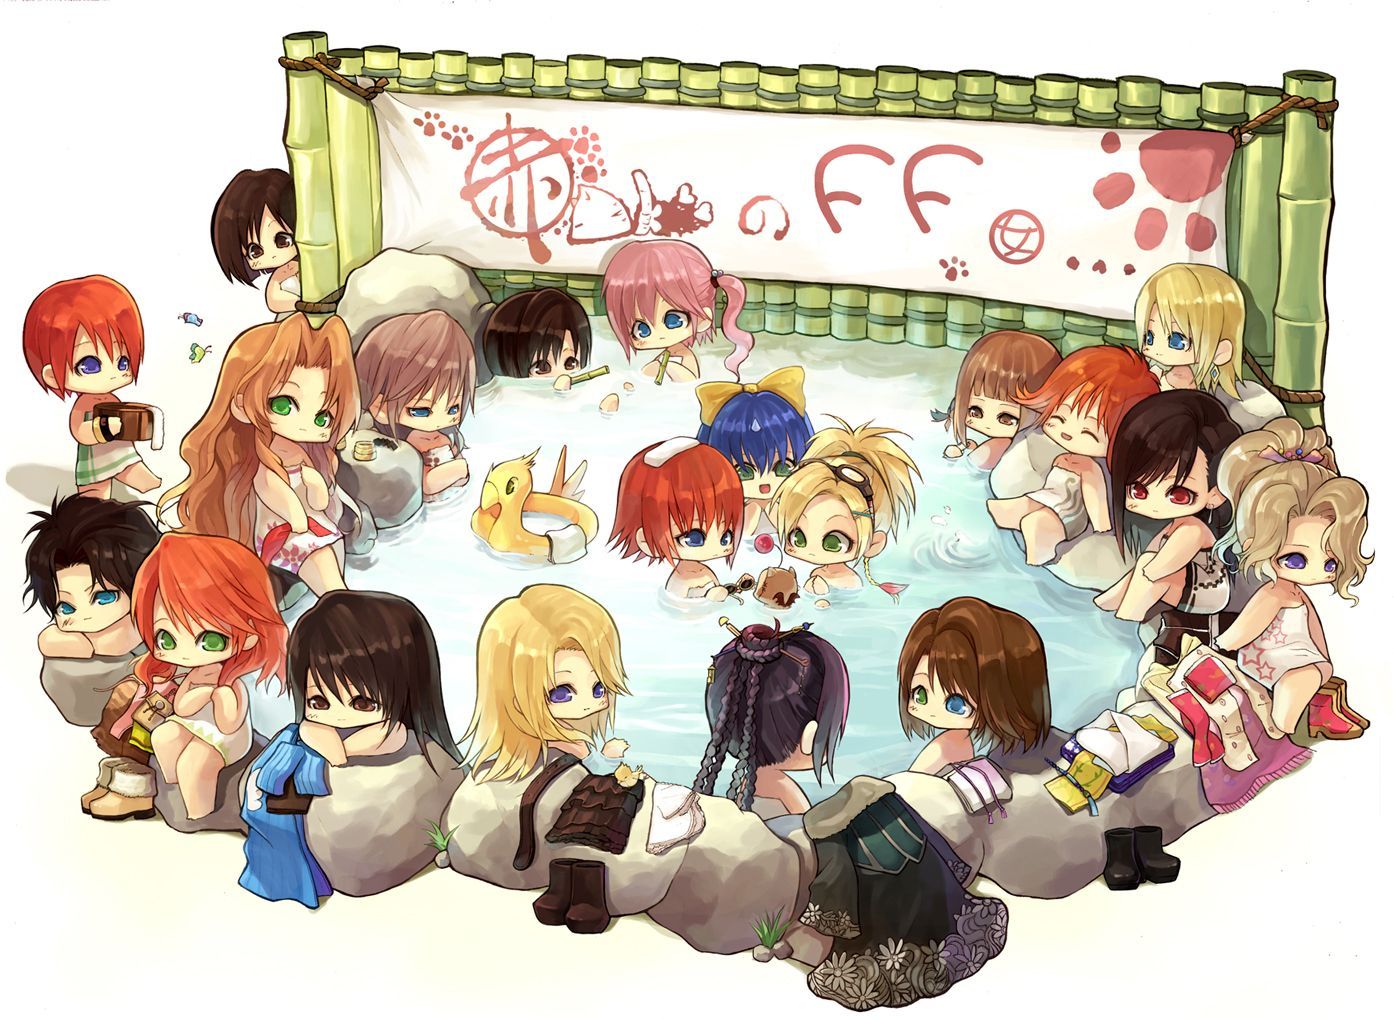 A wallpaper that I found on Final Fantasy Chibi's